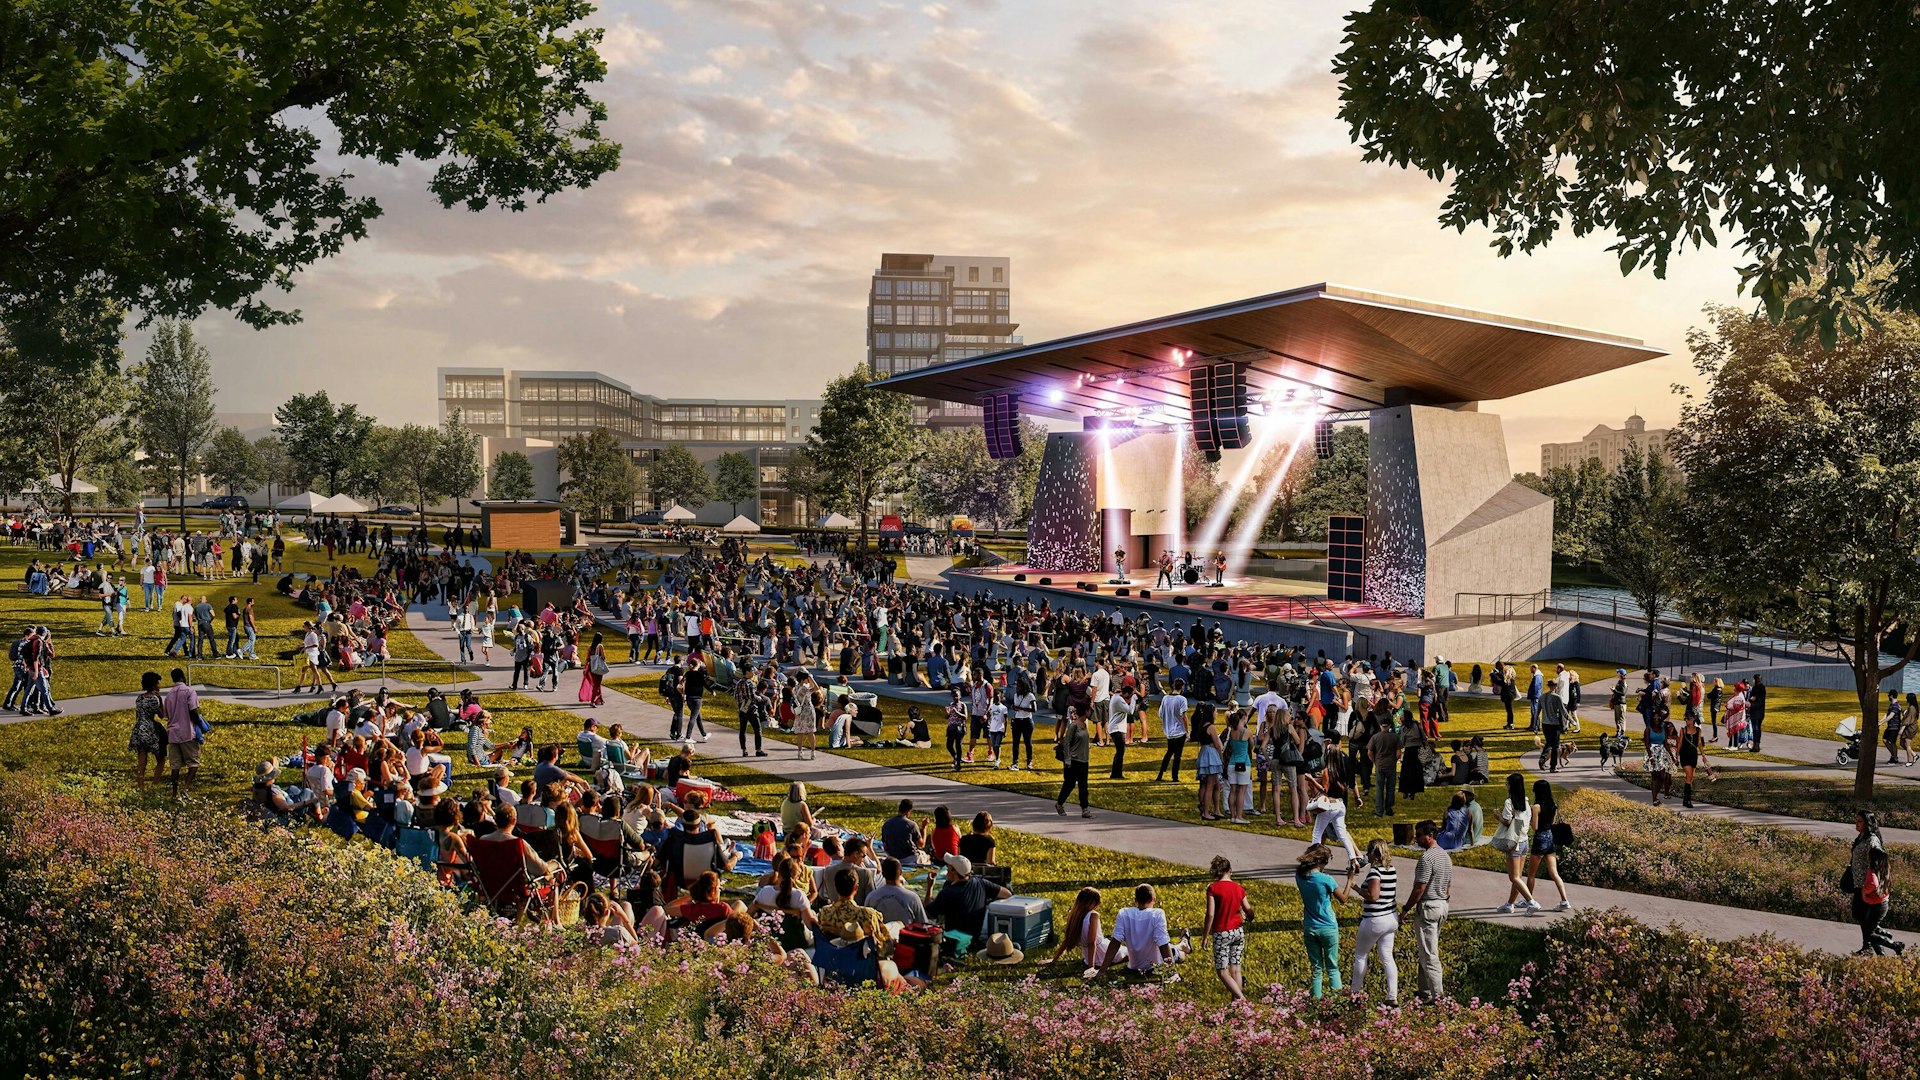 Rendering of The Amphitheater with guests enjoying an outdoor concert